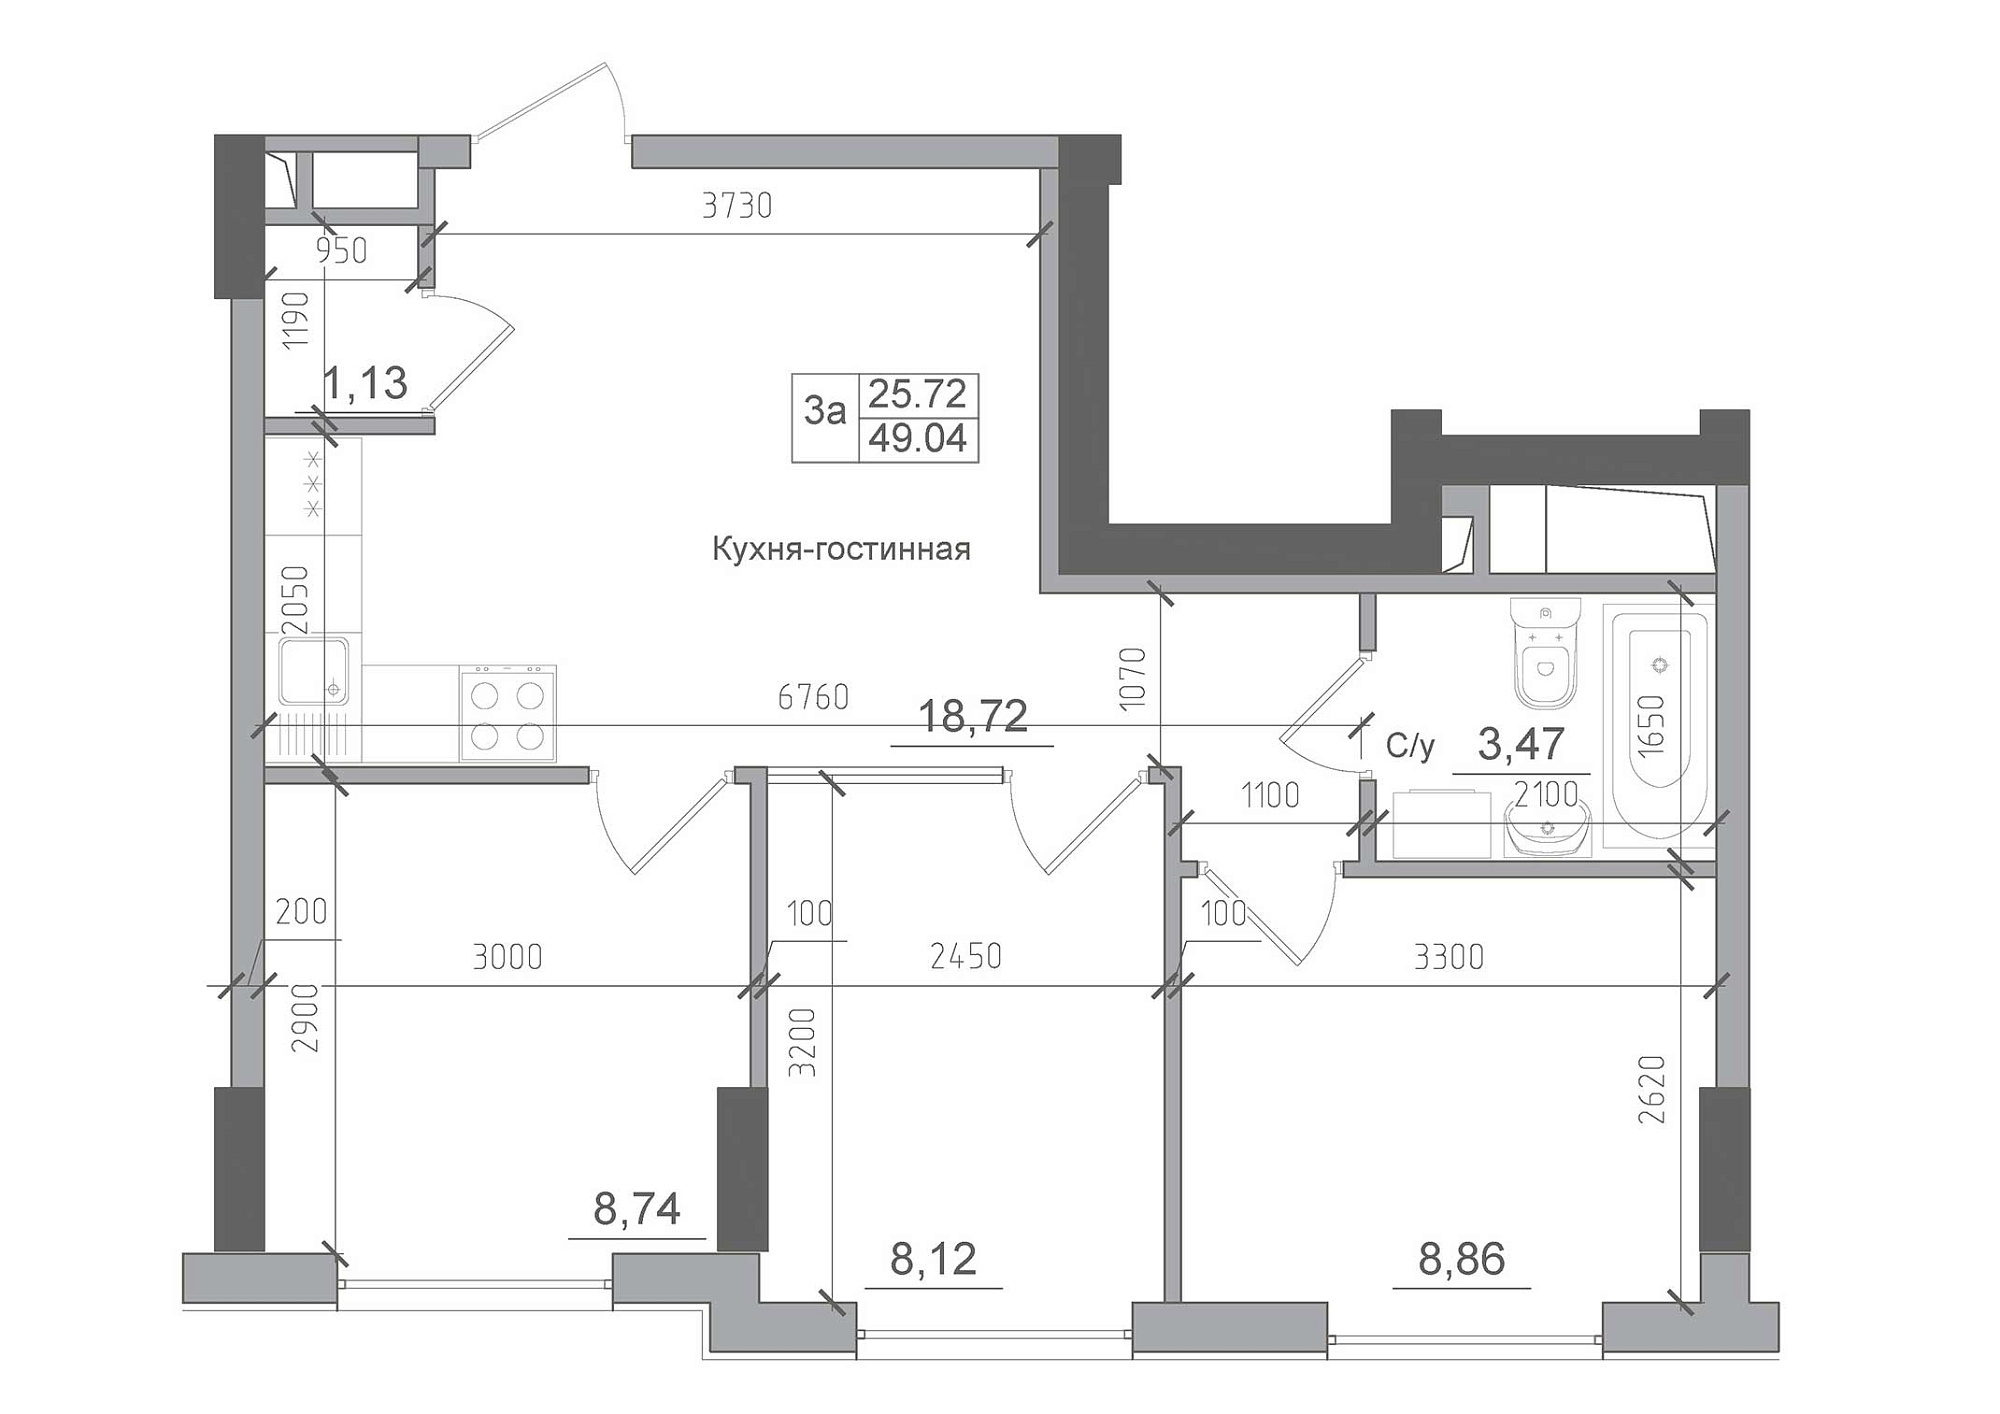 Planning 3-rm flats area 49.04m2, AB-22-01/00007.